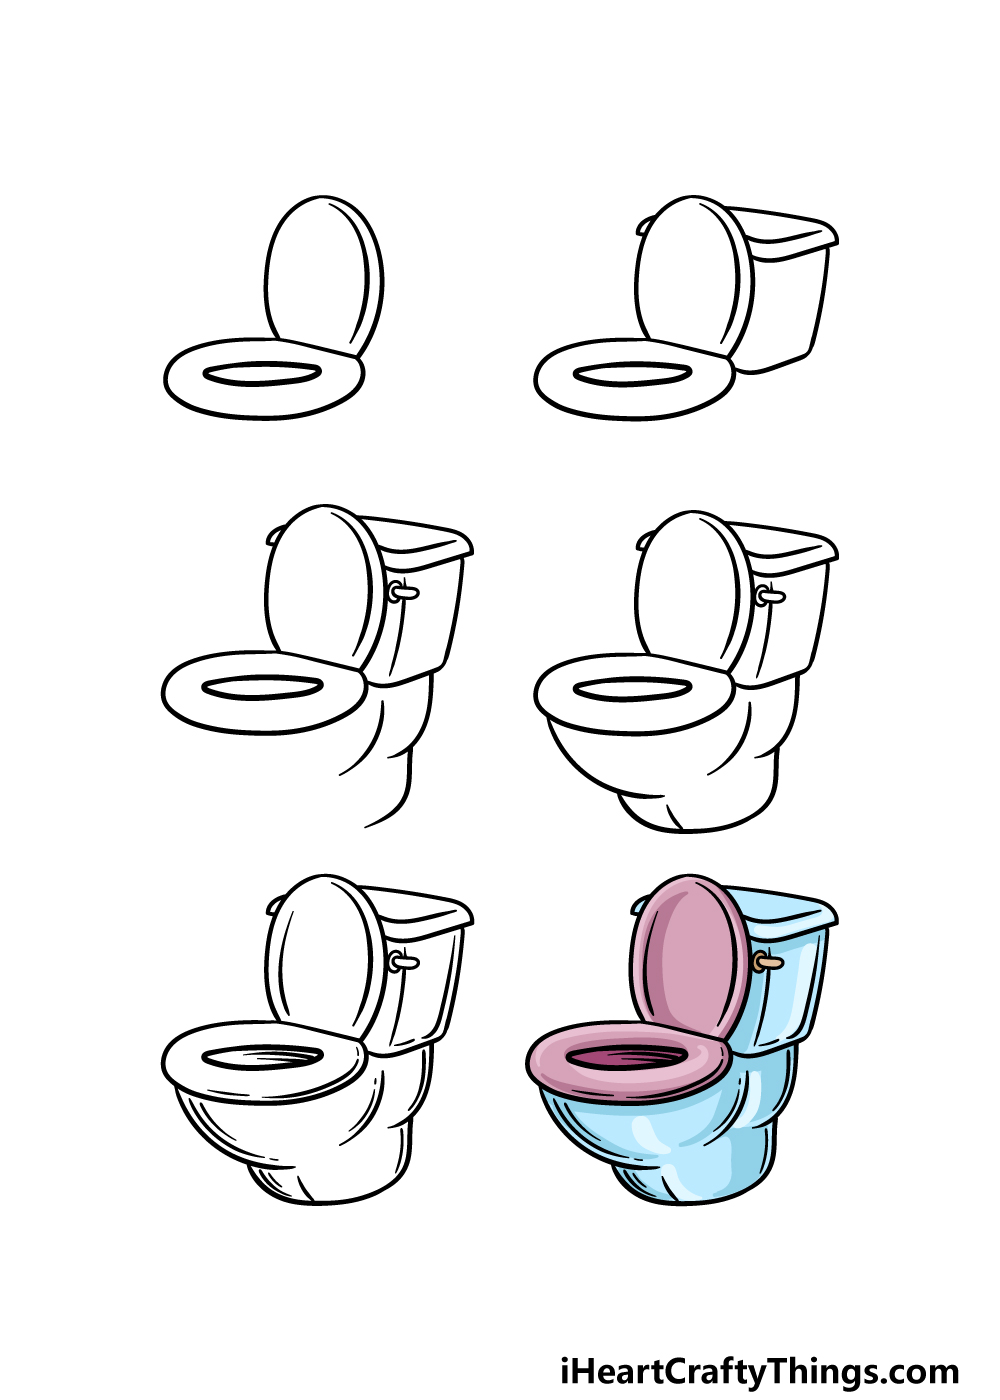 how to draw a toilet in 6 steps